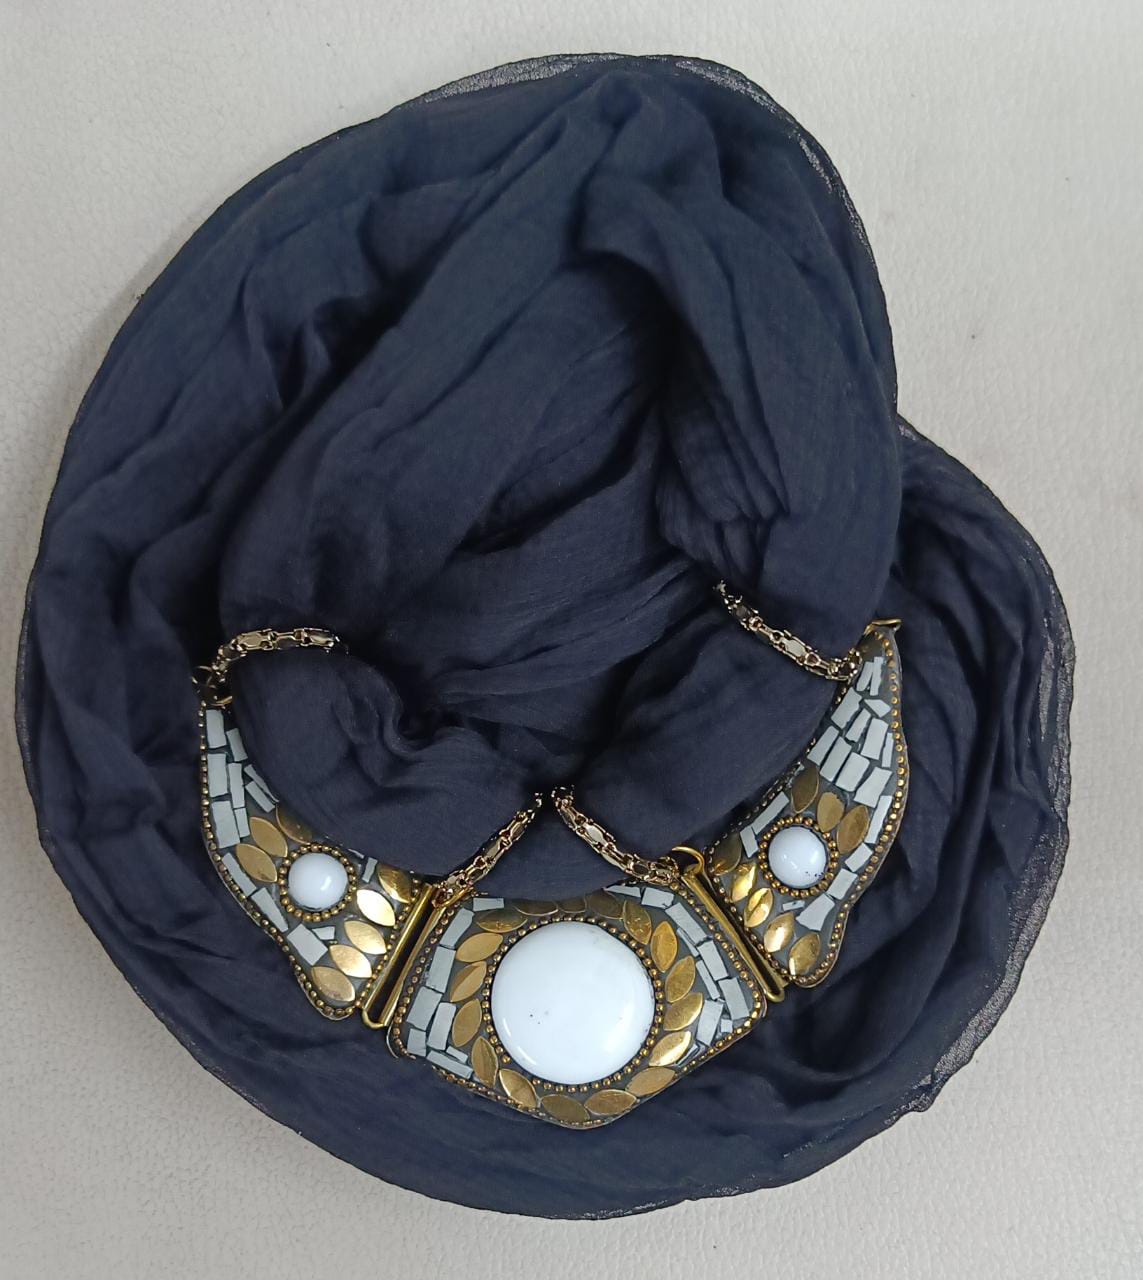 Bdiva Black Georgette Scarf With Indian Jewelry And Oxidised Motif